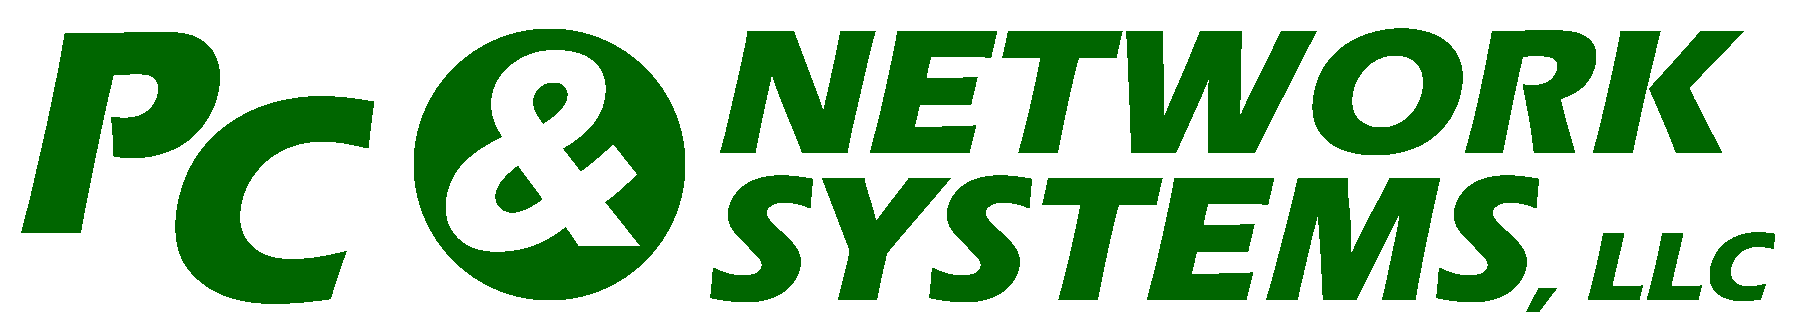 PC & Network Systems